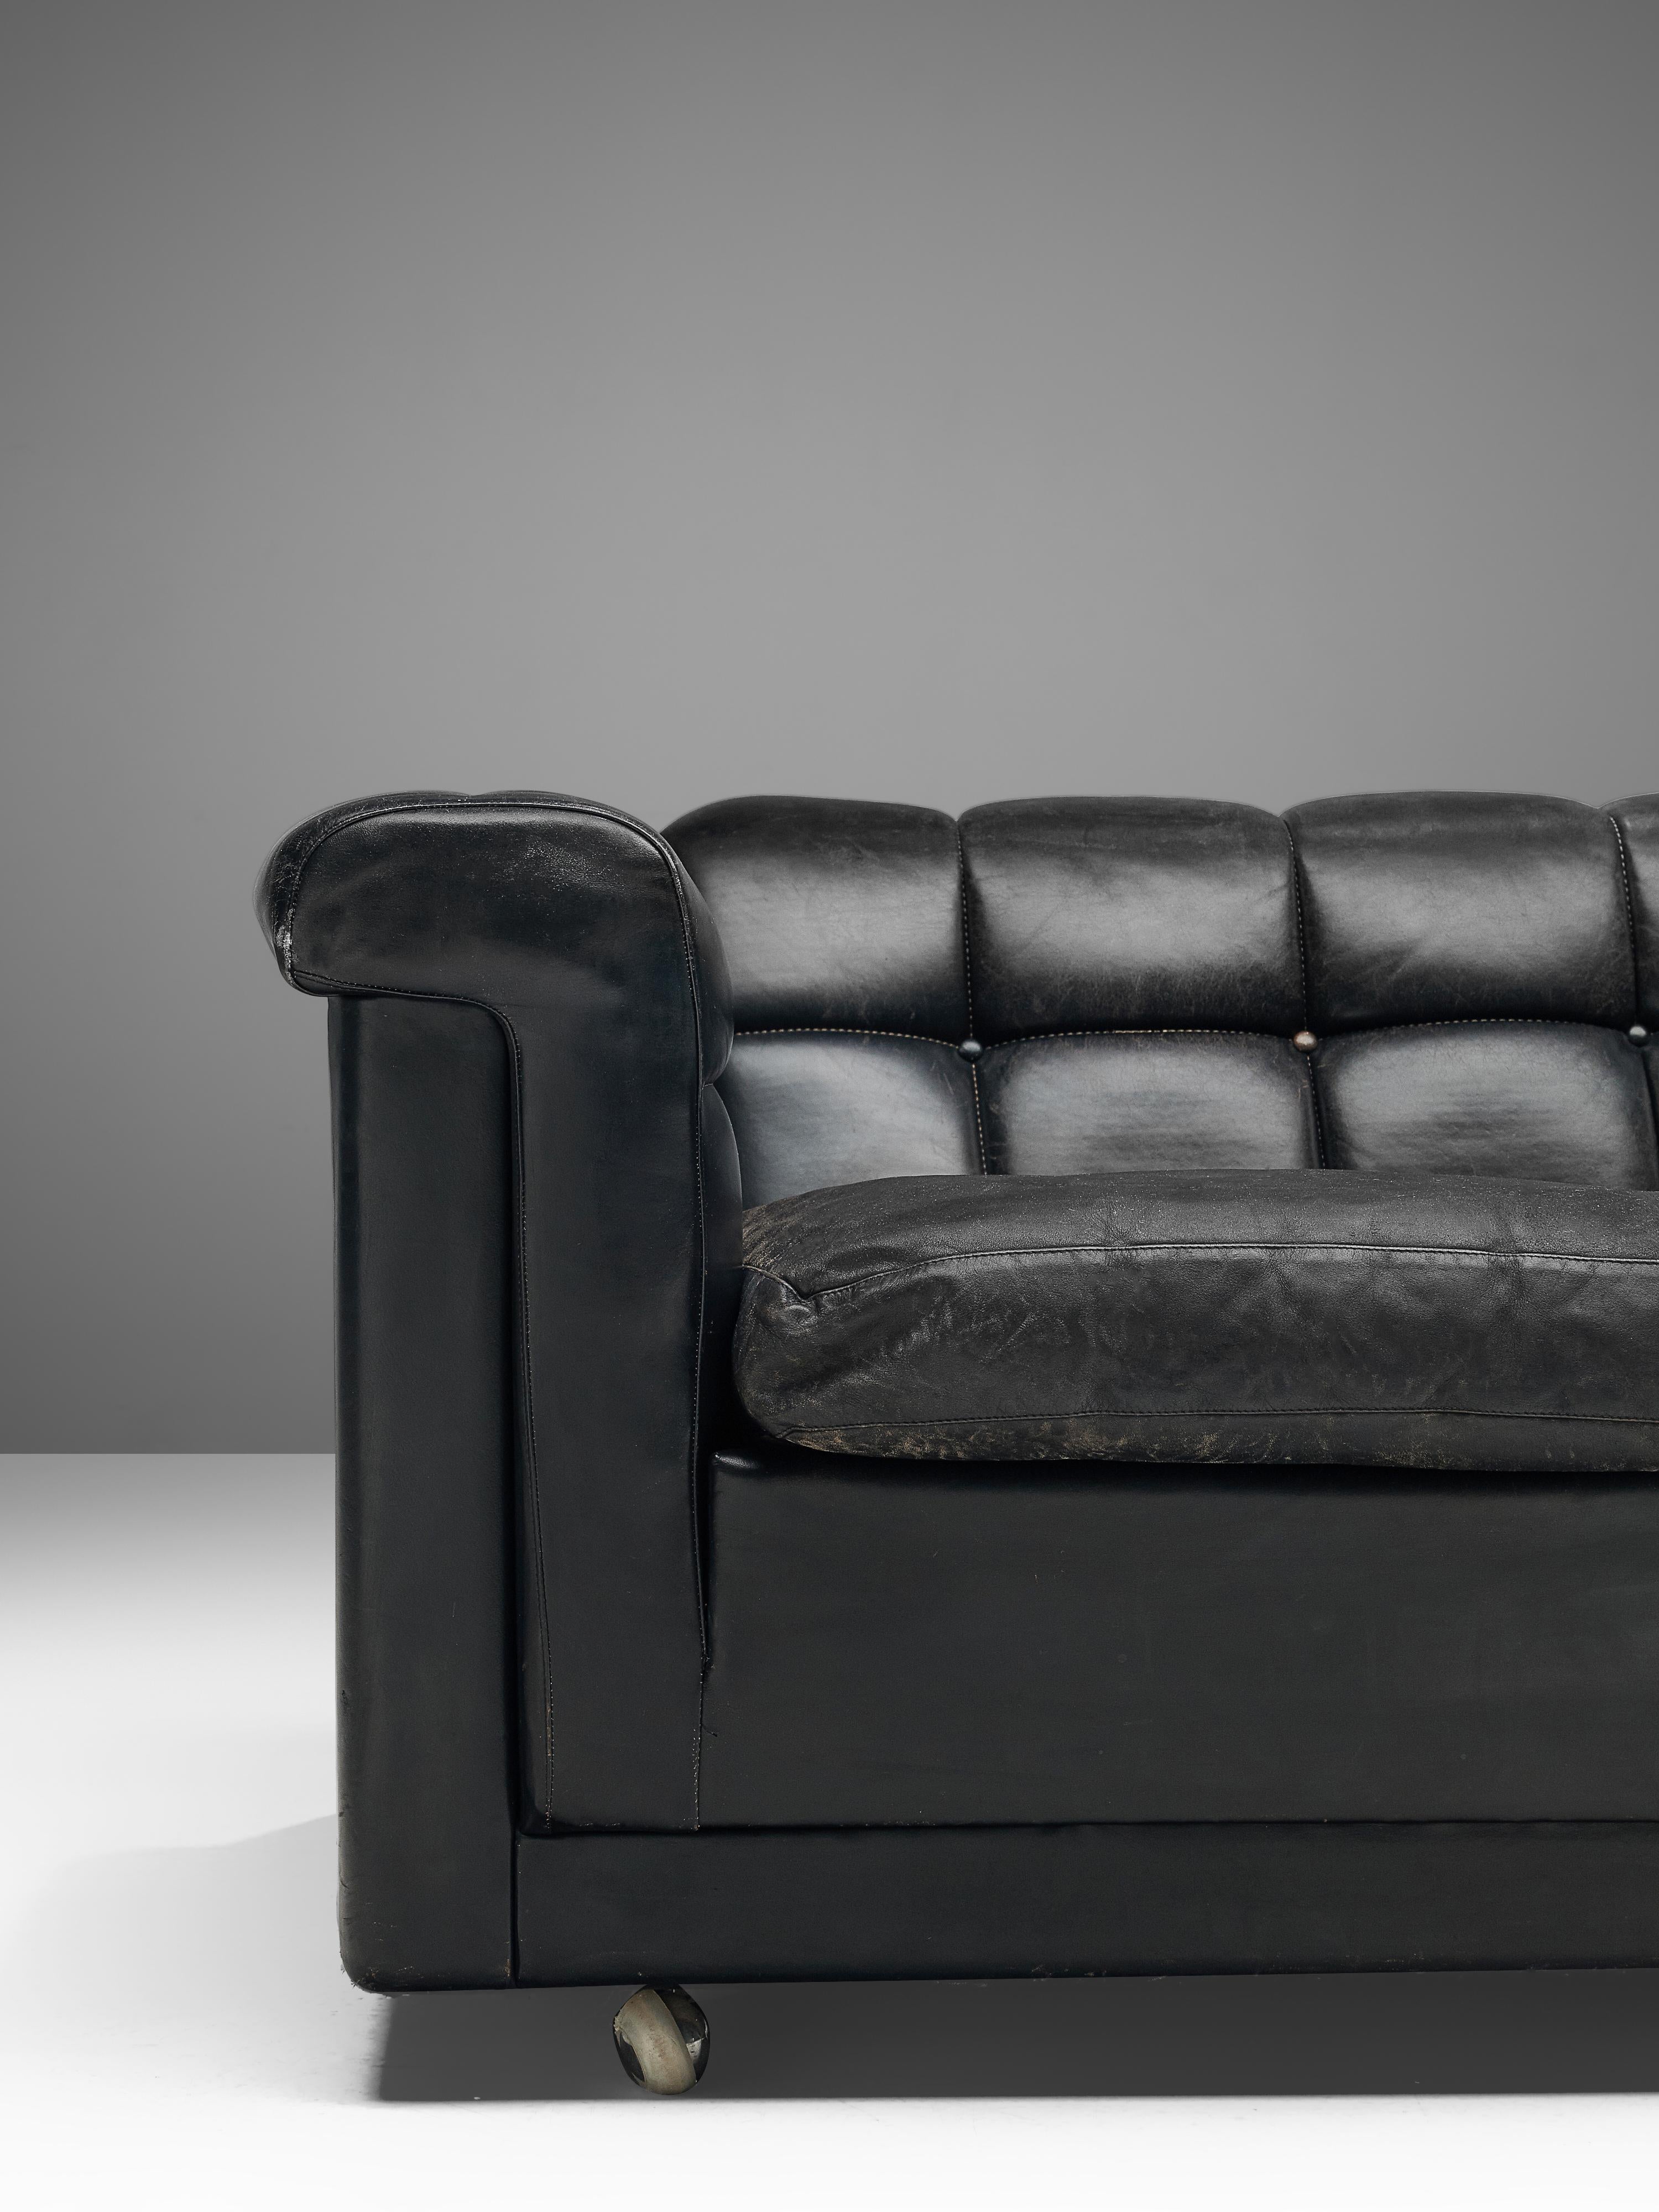 American Edward Wormley Tufted Four-Seat Sofa in Black Leather